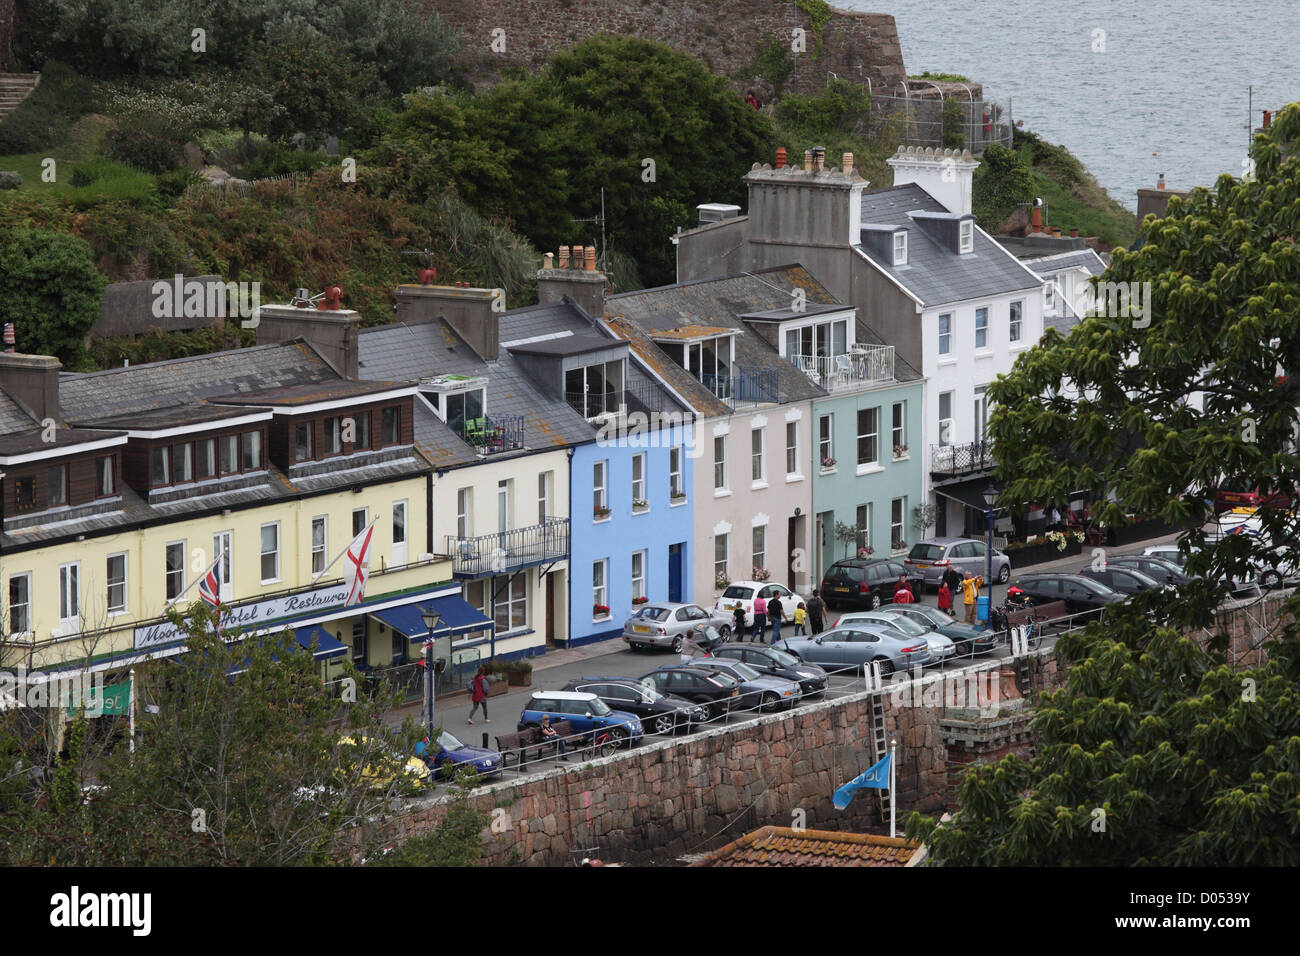 St martin, Jersey showing attractive line of sea front Victorian properties Stock Photo